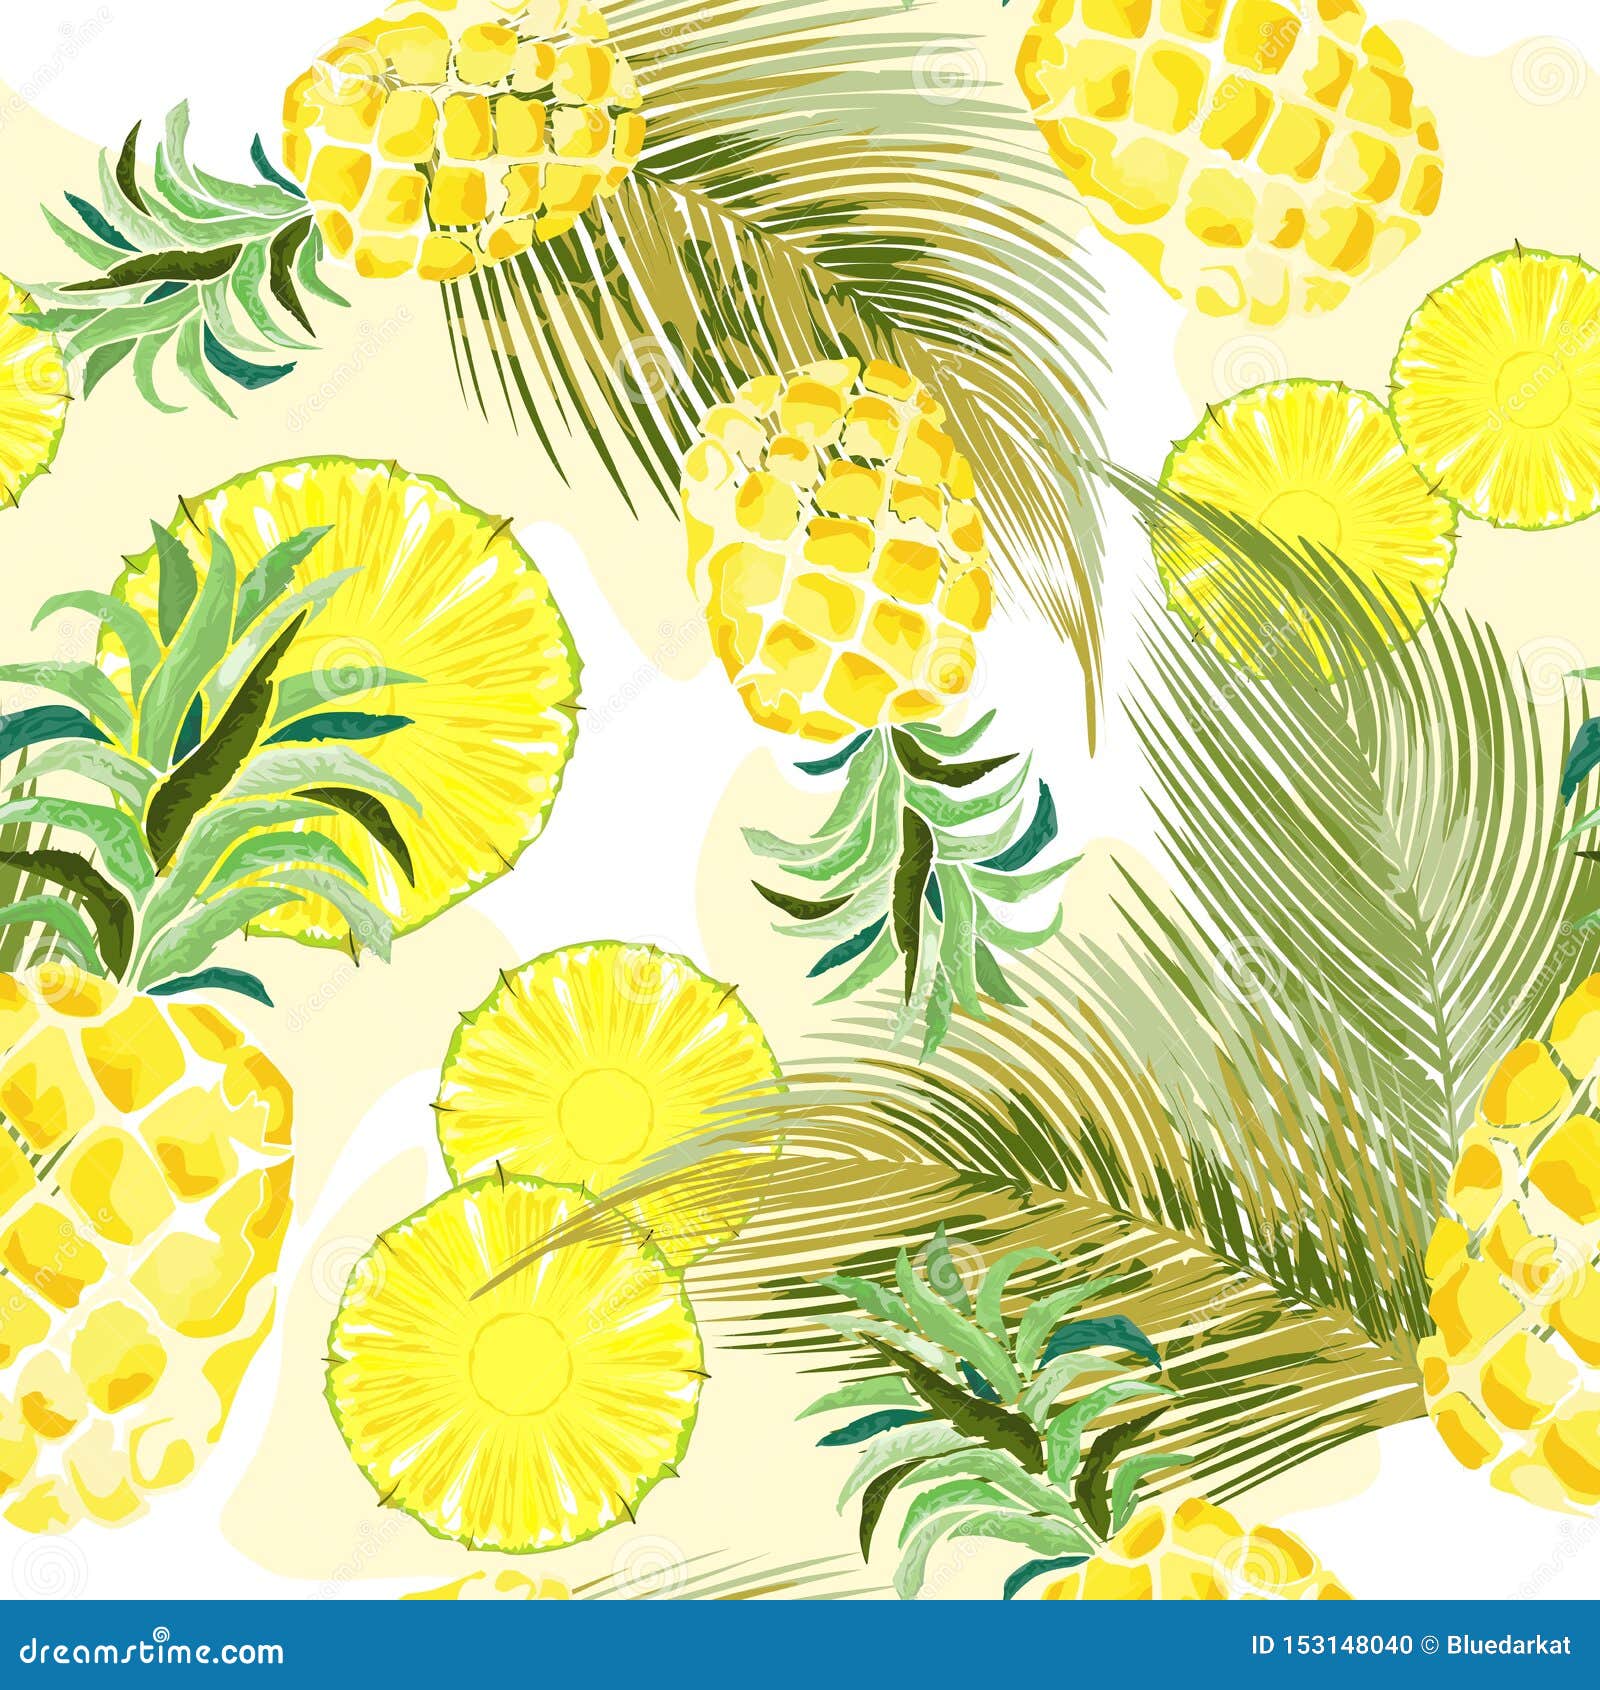 Download Pineapple Watercolor Fresh Vector Seamless Pattern Textile Design Stock Vector - Illustration of ...